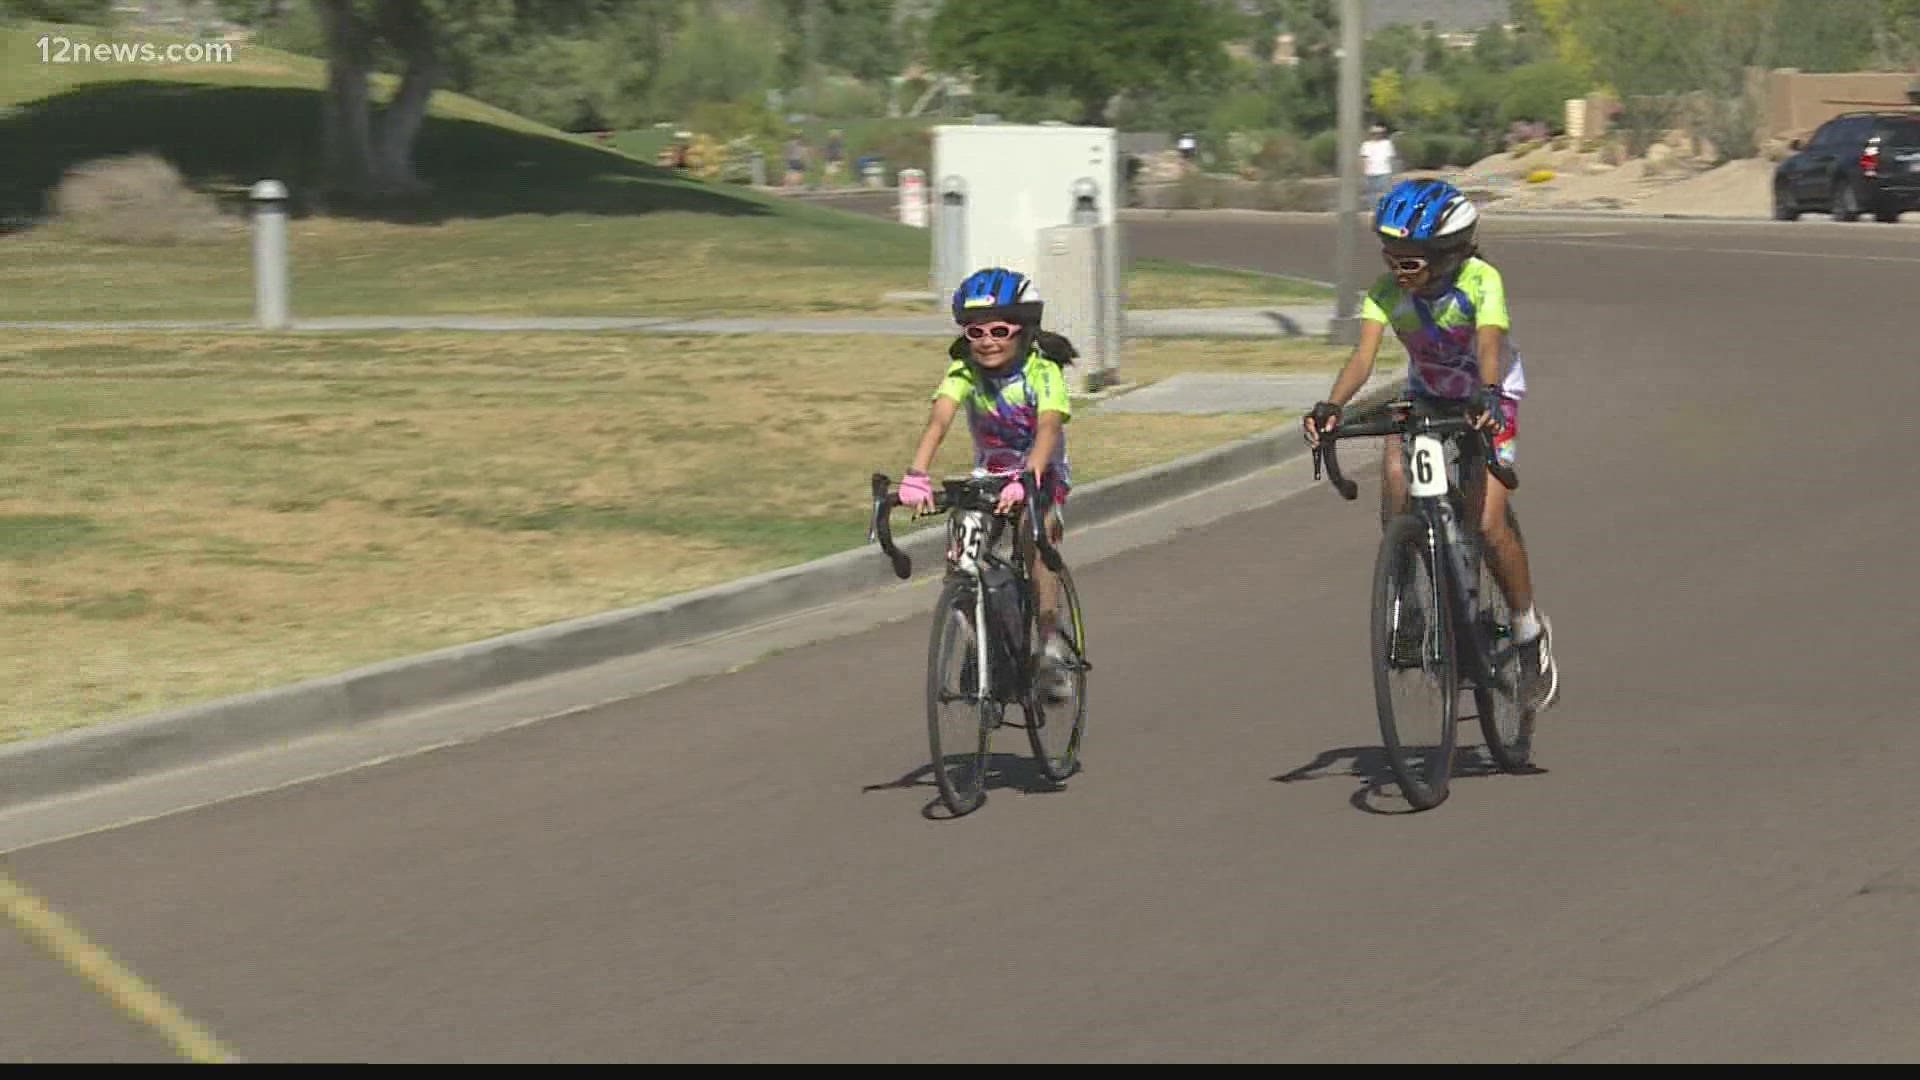 Two young girls biked in a Valley event all for one mother who was killed while riding home on her bicycle in Ukraine.